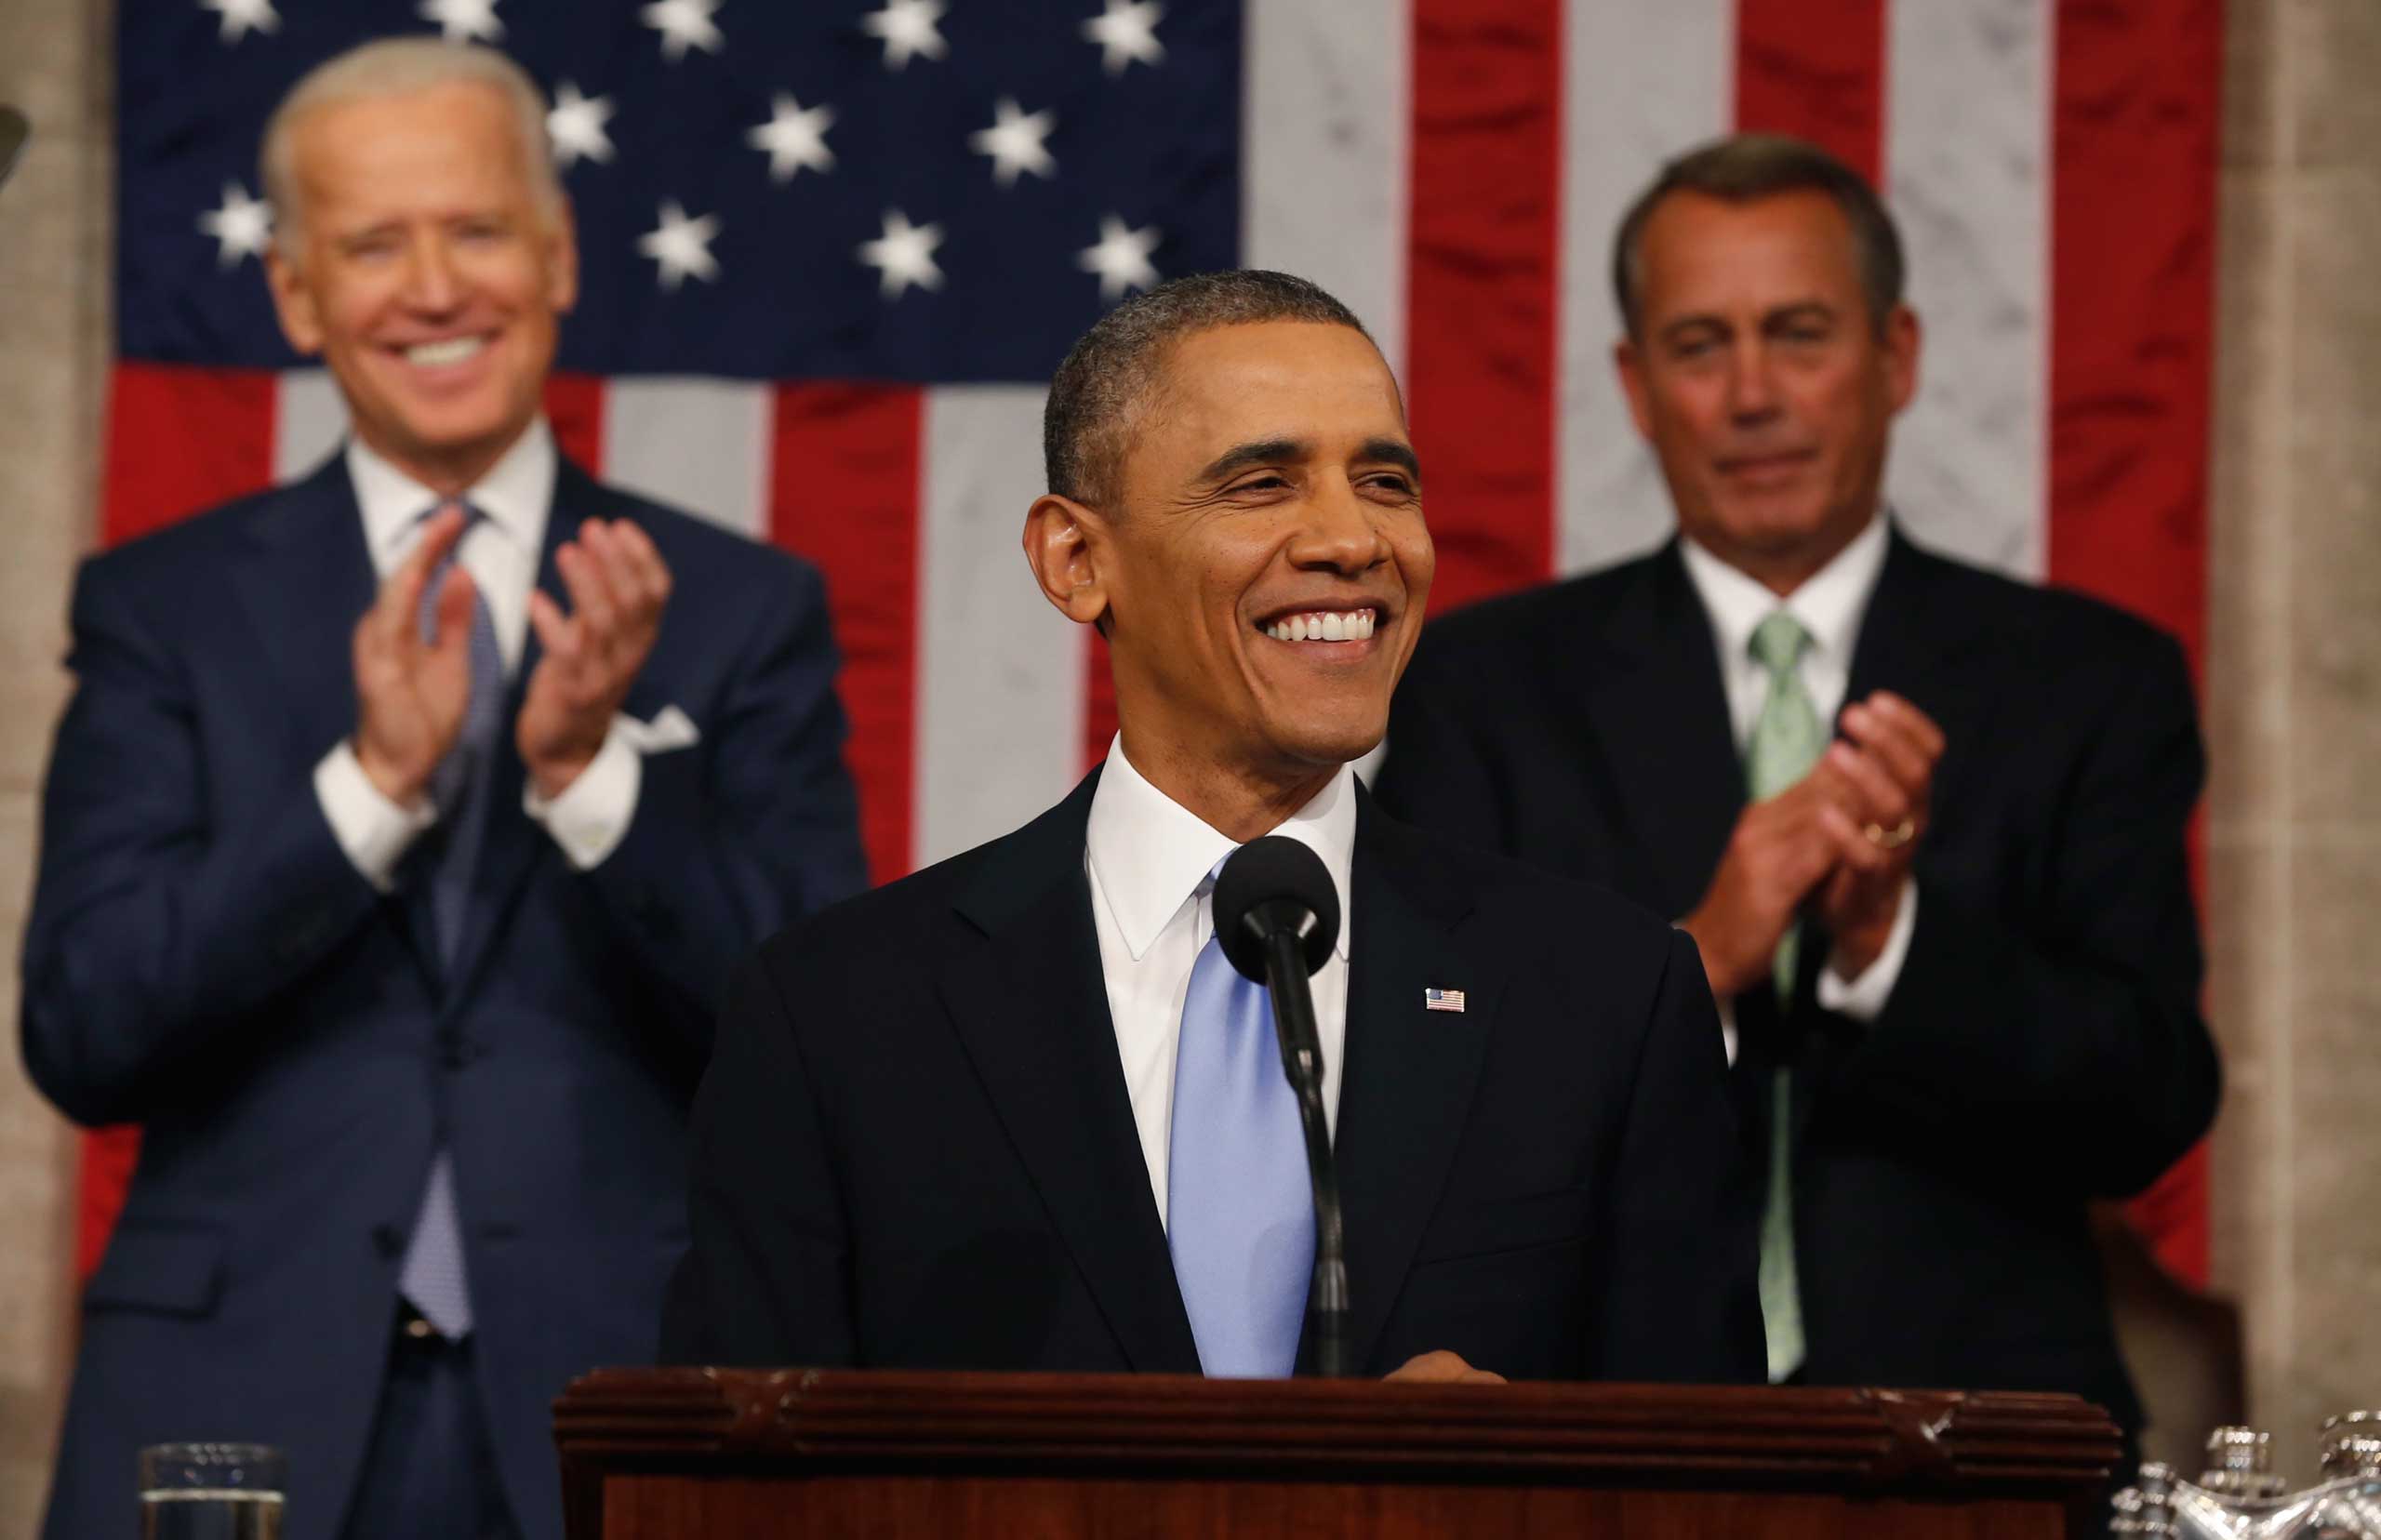 President Obama Delivers State Of The Union Address At U.S. Capitol in 2014. (Larry Downing—Pool/Getty Images)